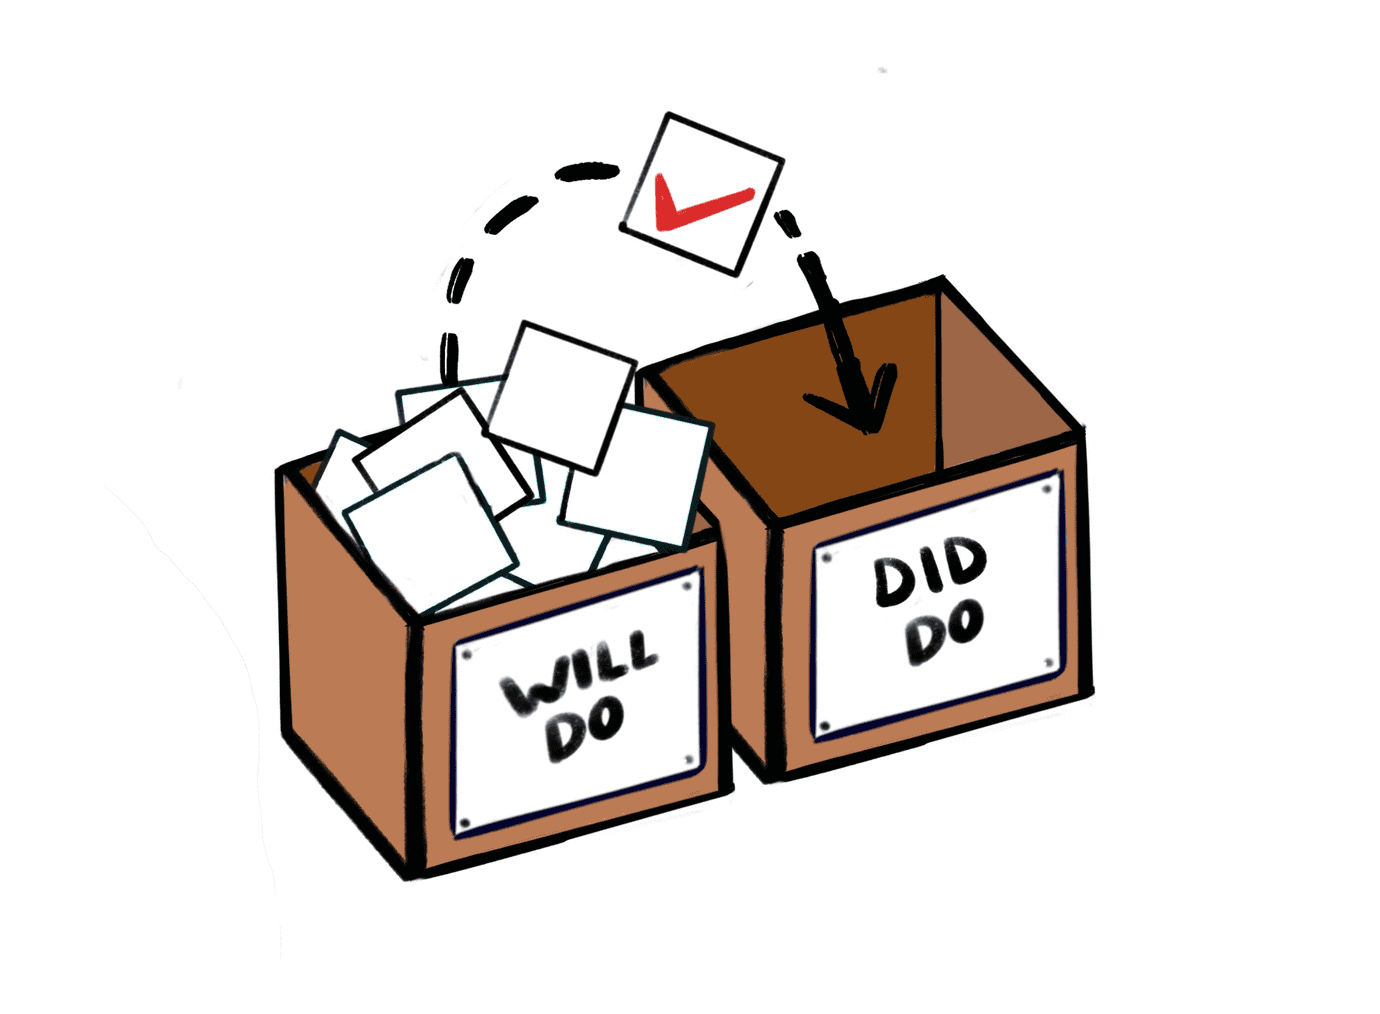 filled in checkbox getting moved from "will do" box to "did do" box